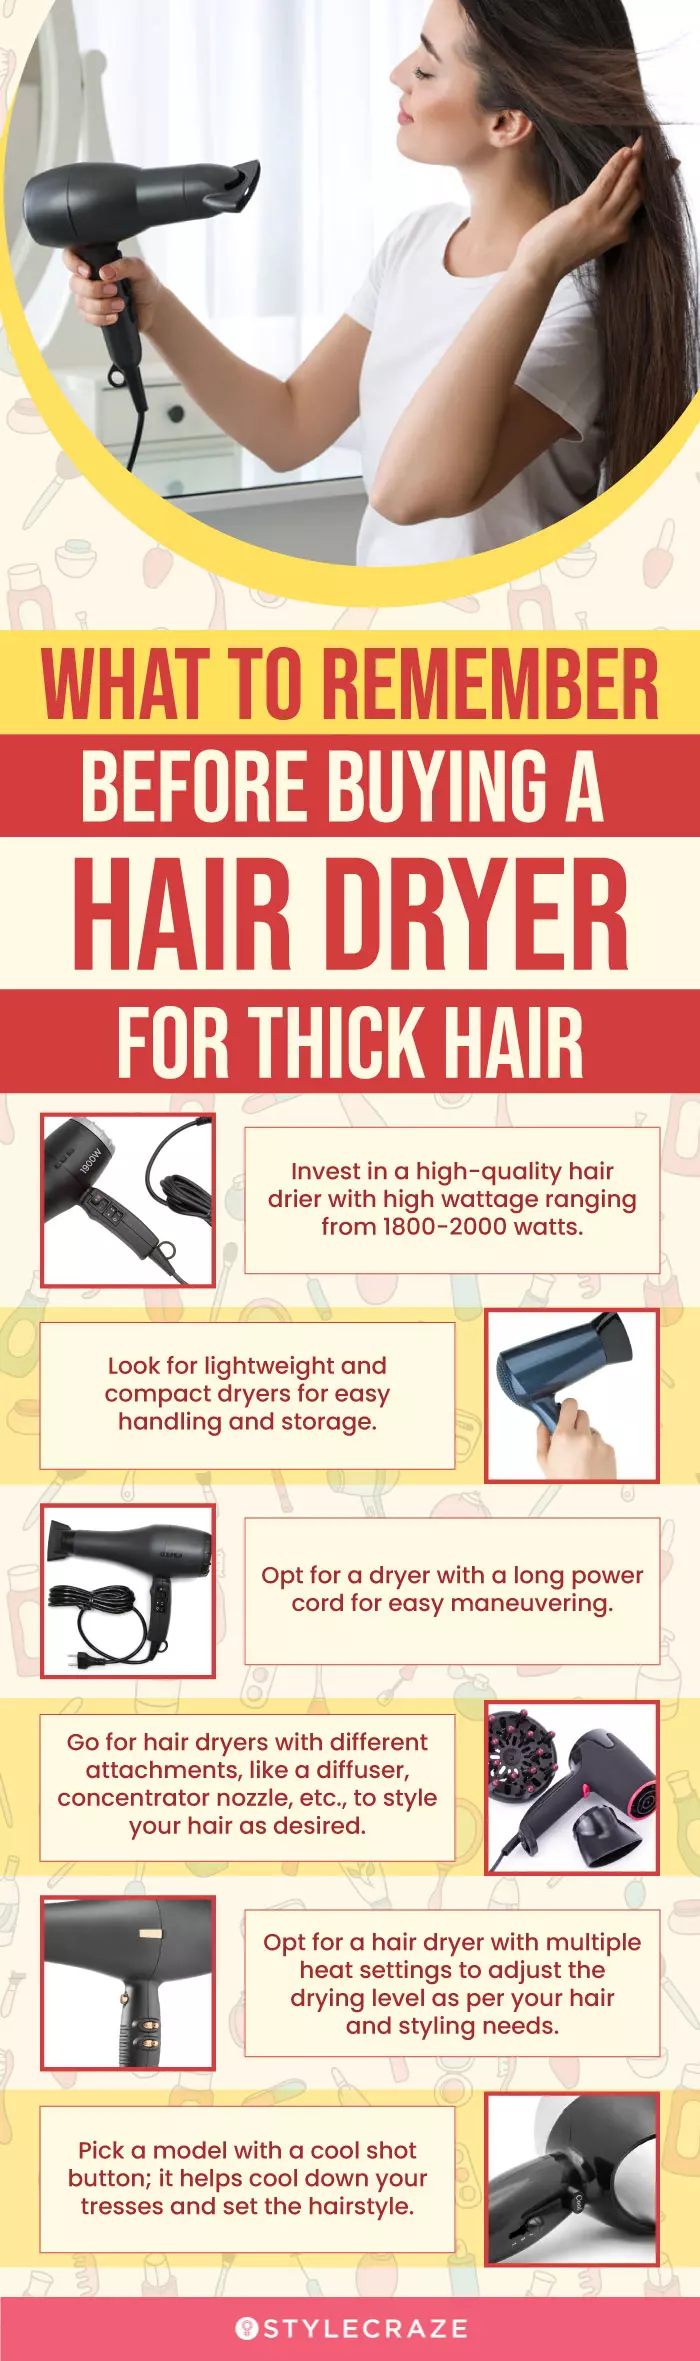 What To Remember Before Buying Hair Dryer For Thick Hair (infographic)